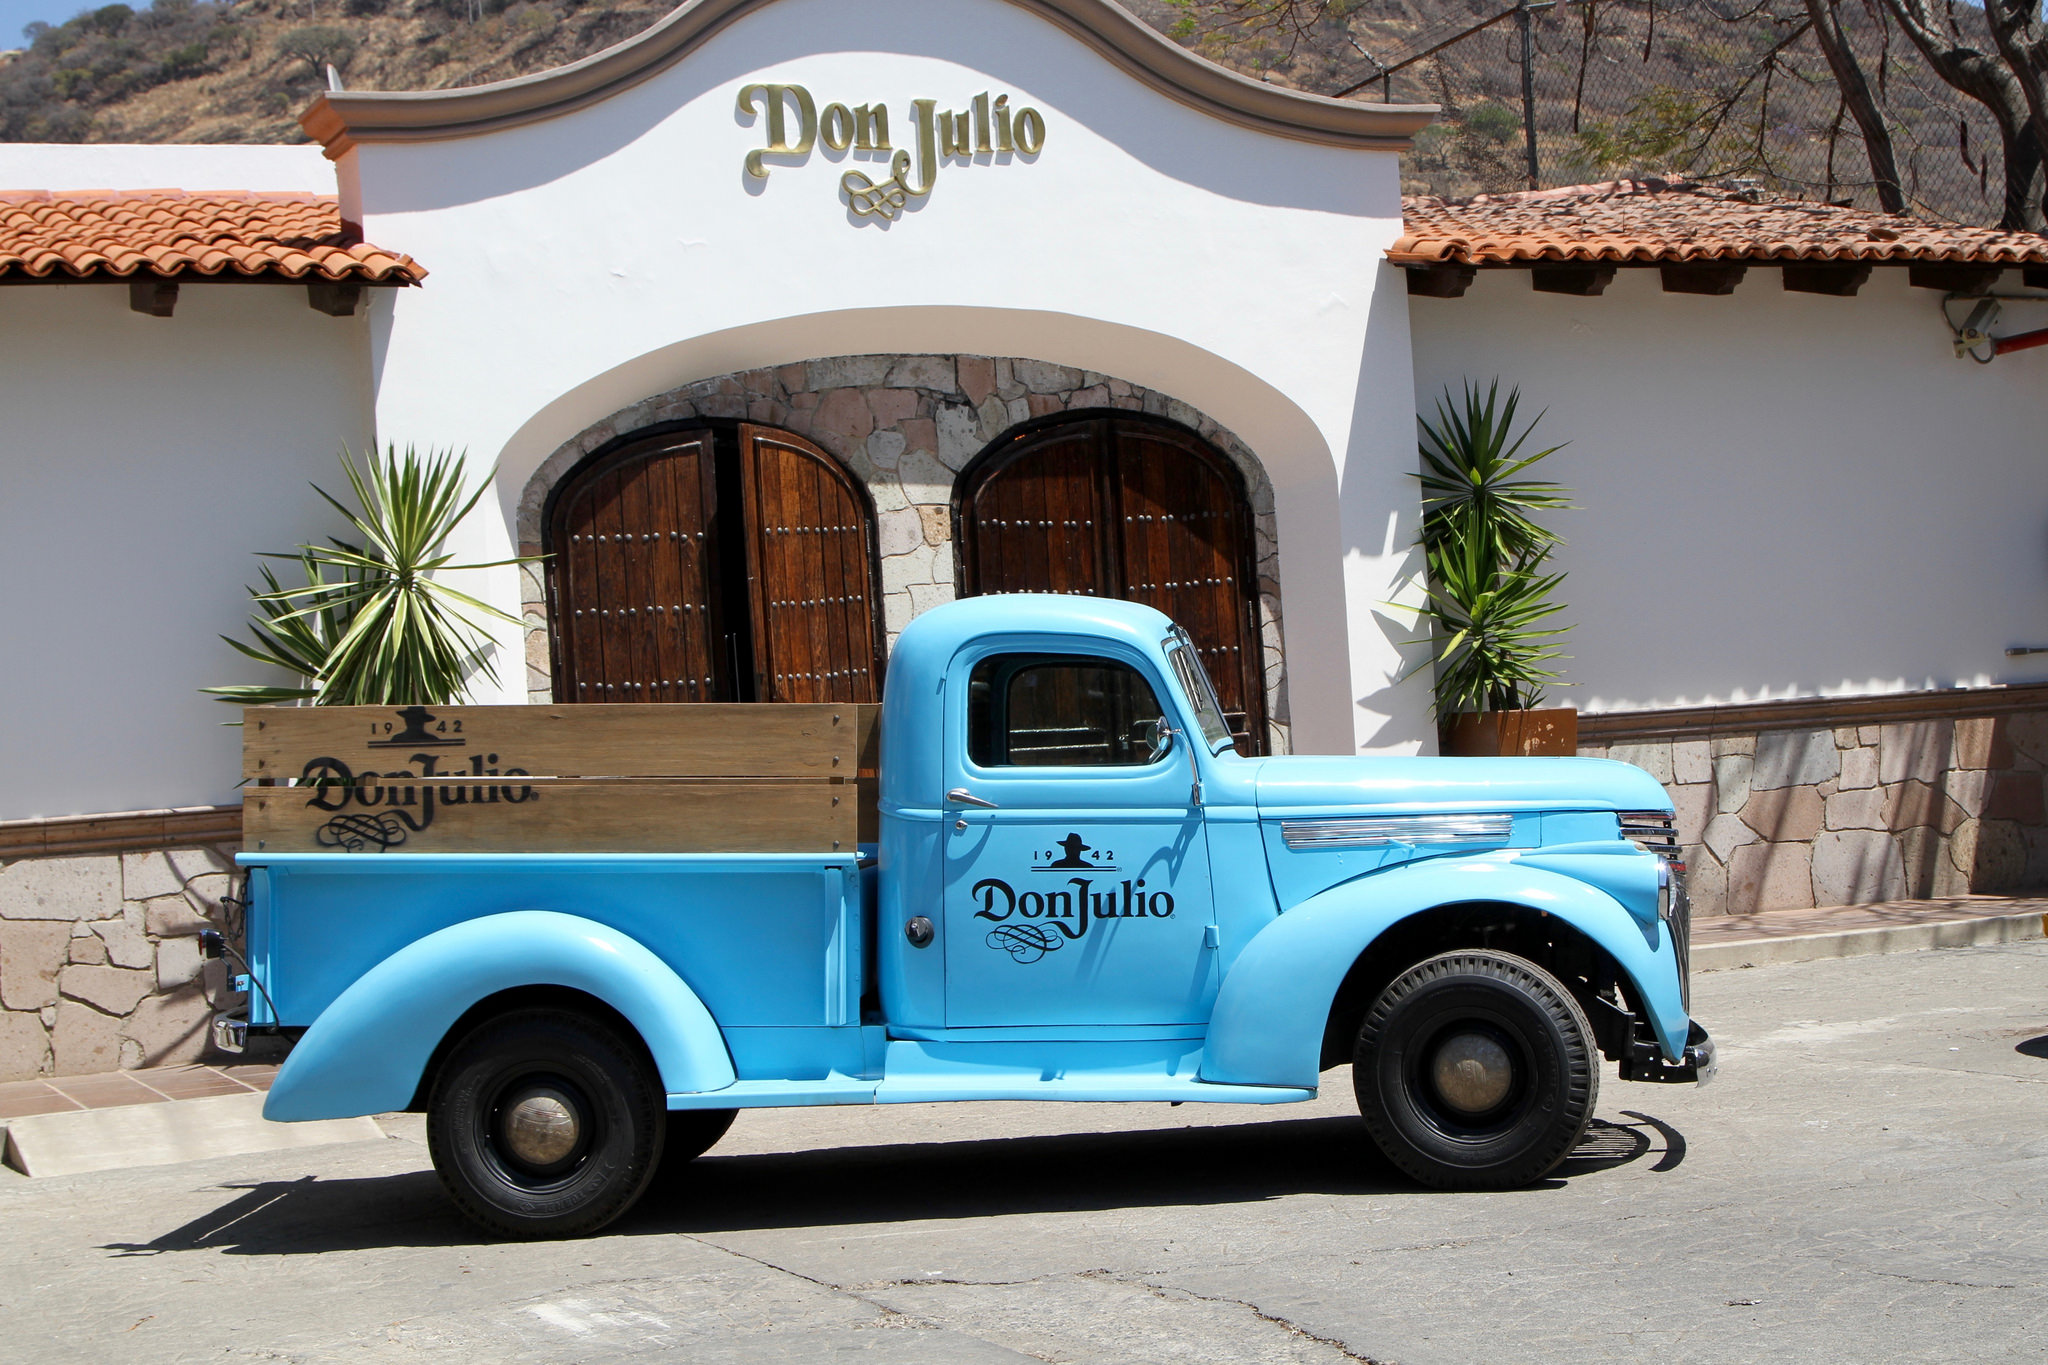 Tradition at Don Julio